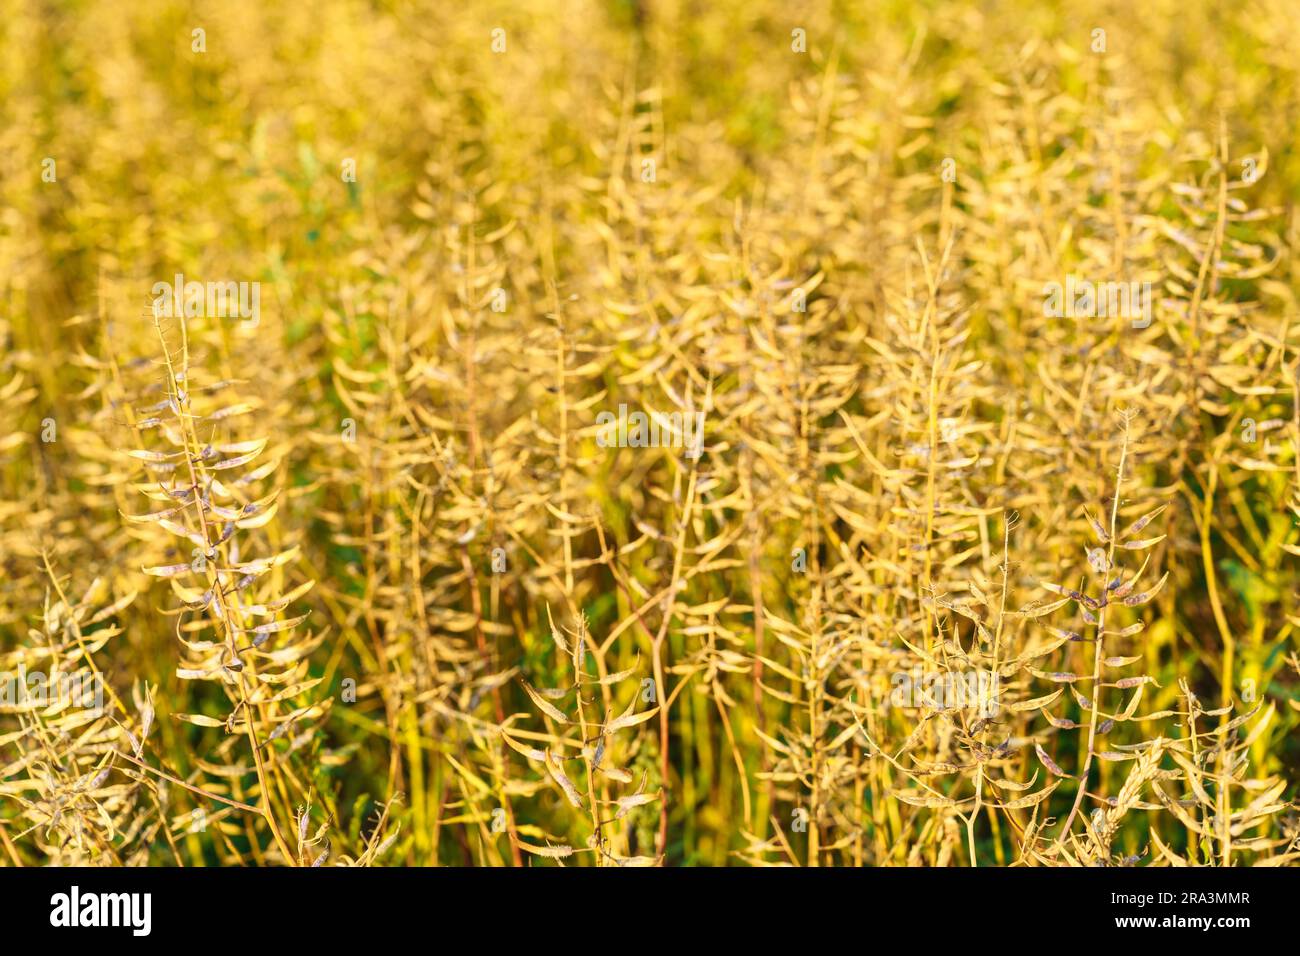 Mustard field. Mustard seeds also called Brassica napus are ripe for harvest Stock Photo